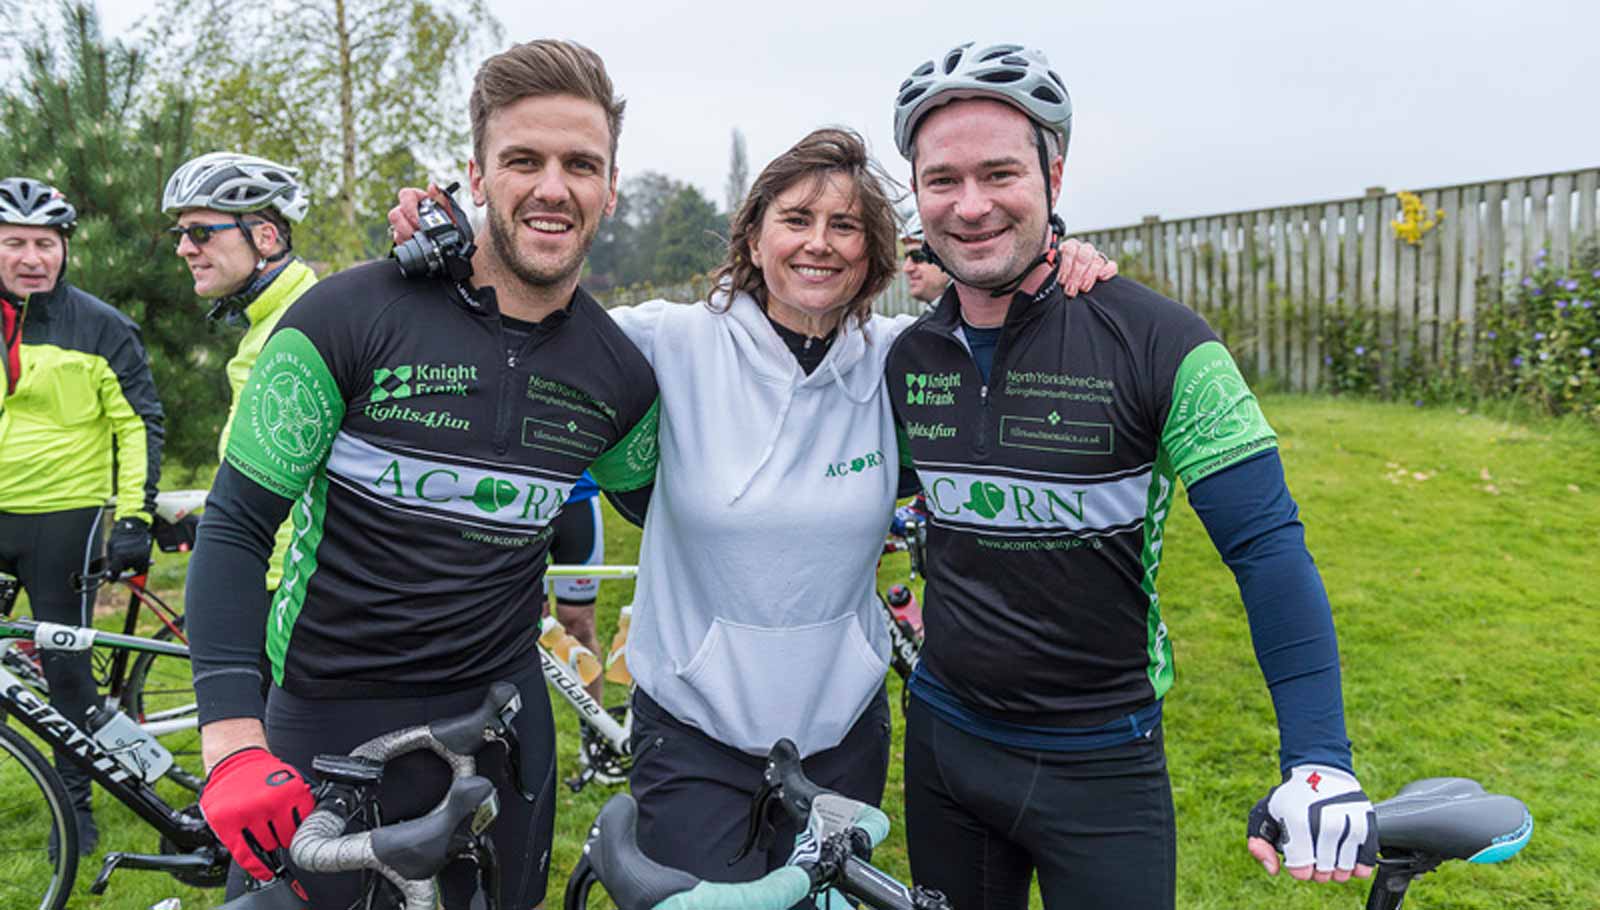 Louise Hanen of Acorn pictured with sponsor Lights4Fun's Matt Naughton and Ross Marchant